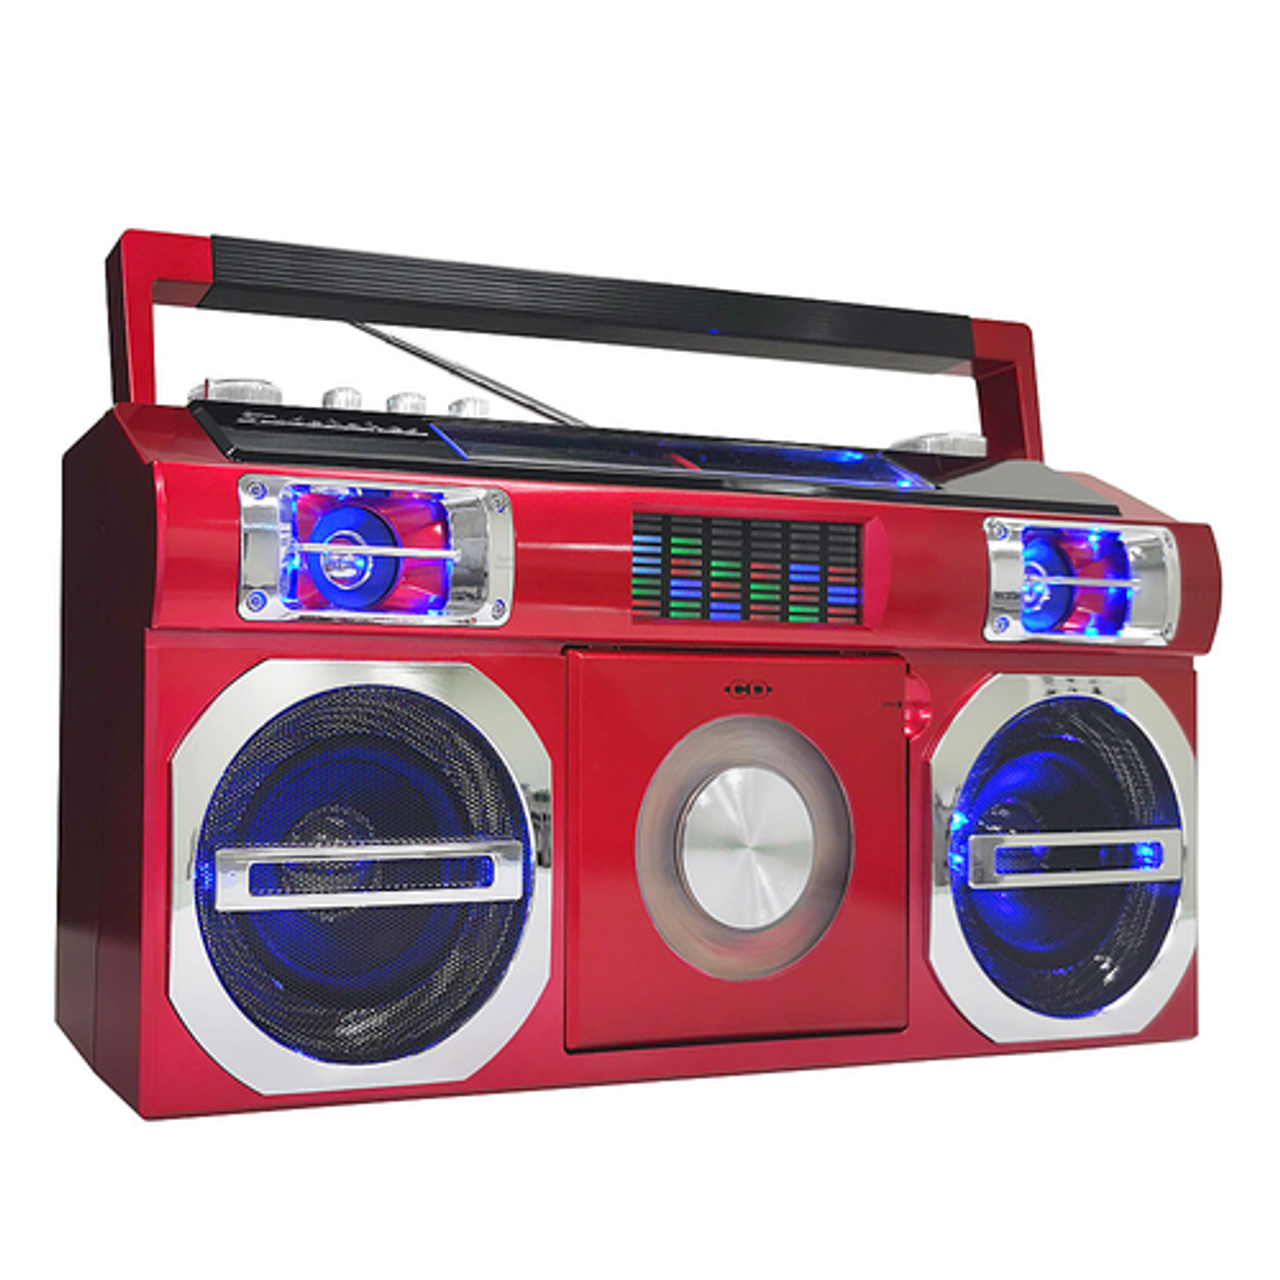 Studebaker - Bluetooth Boombox with FM Radio, CD Player, 10 watts RMS - Red